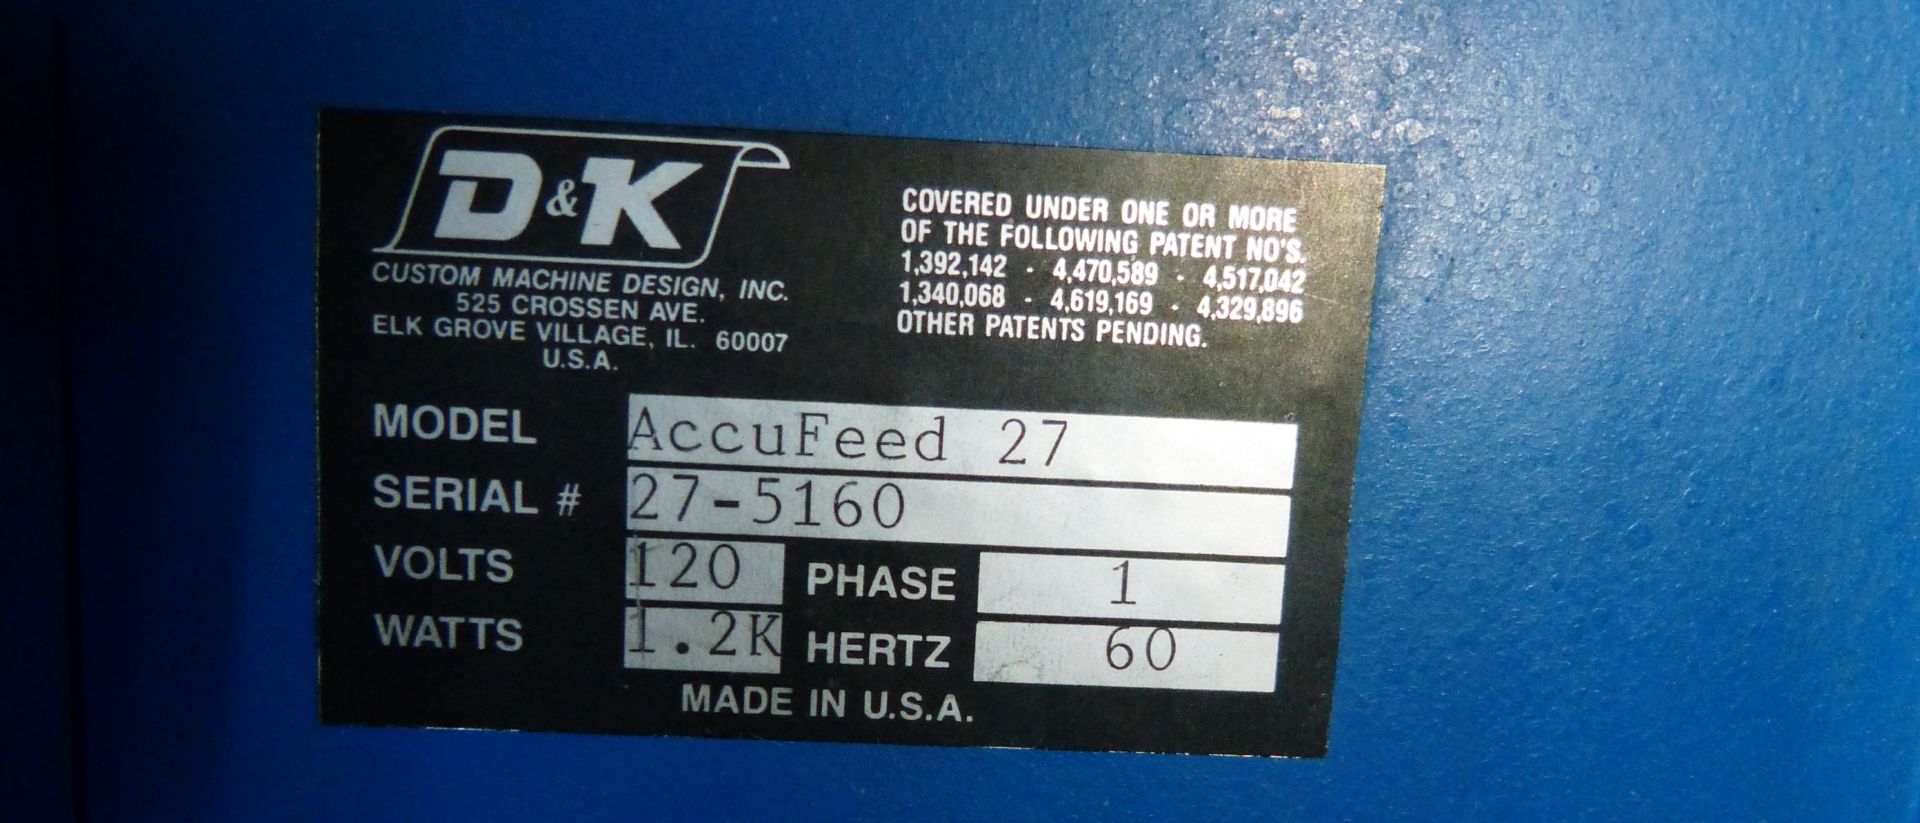 D + K ACCUFEED 27 LAMINATOR 28 INCH WIDE - Image 6 of 7